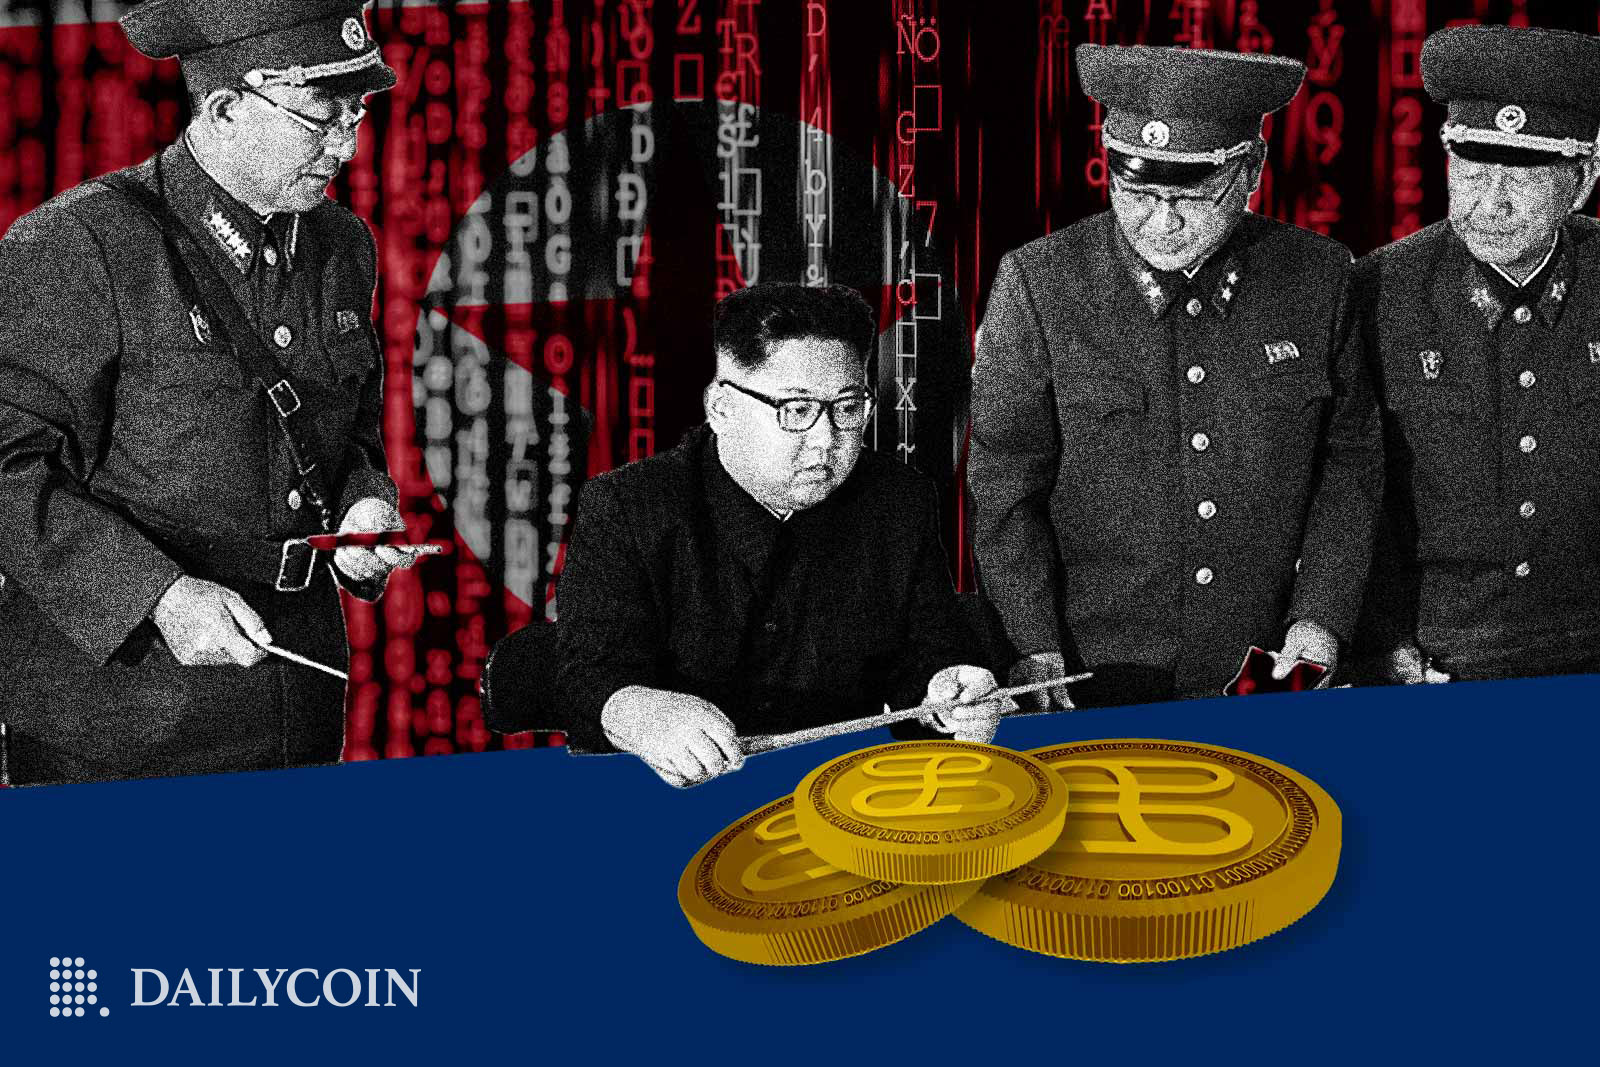 Kim Jong Un and officers are sitting at the table near huge crypto coins